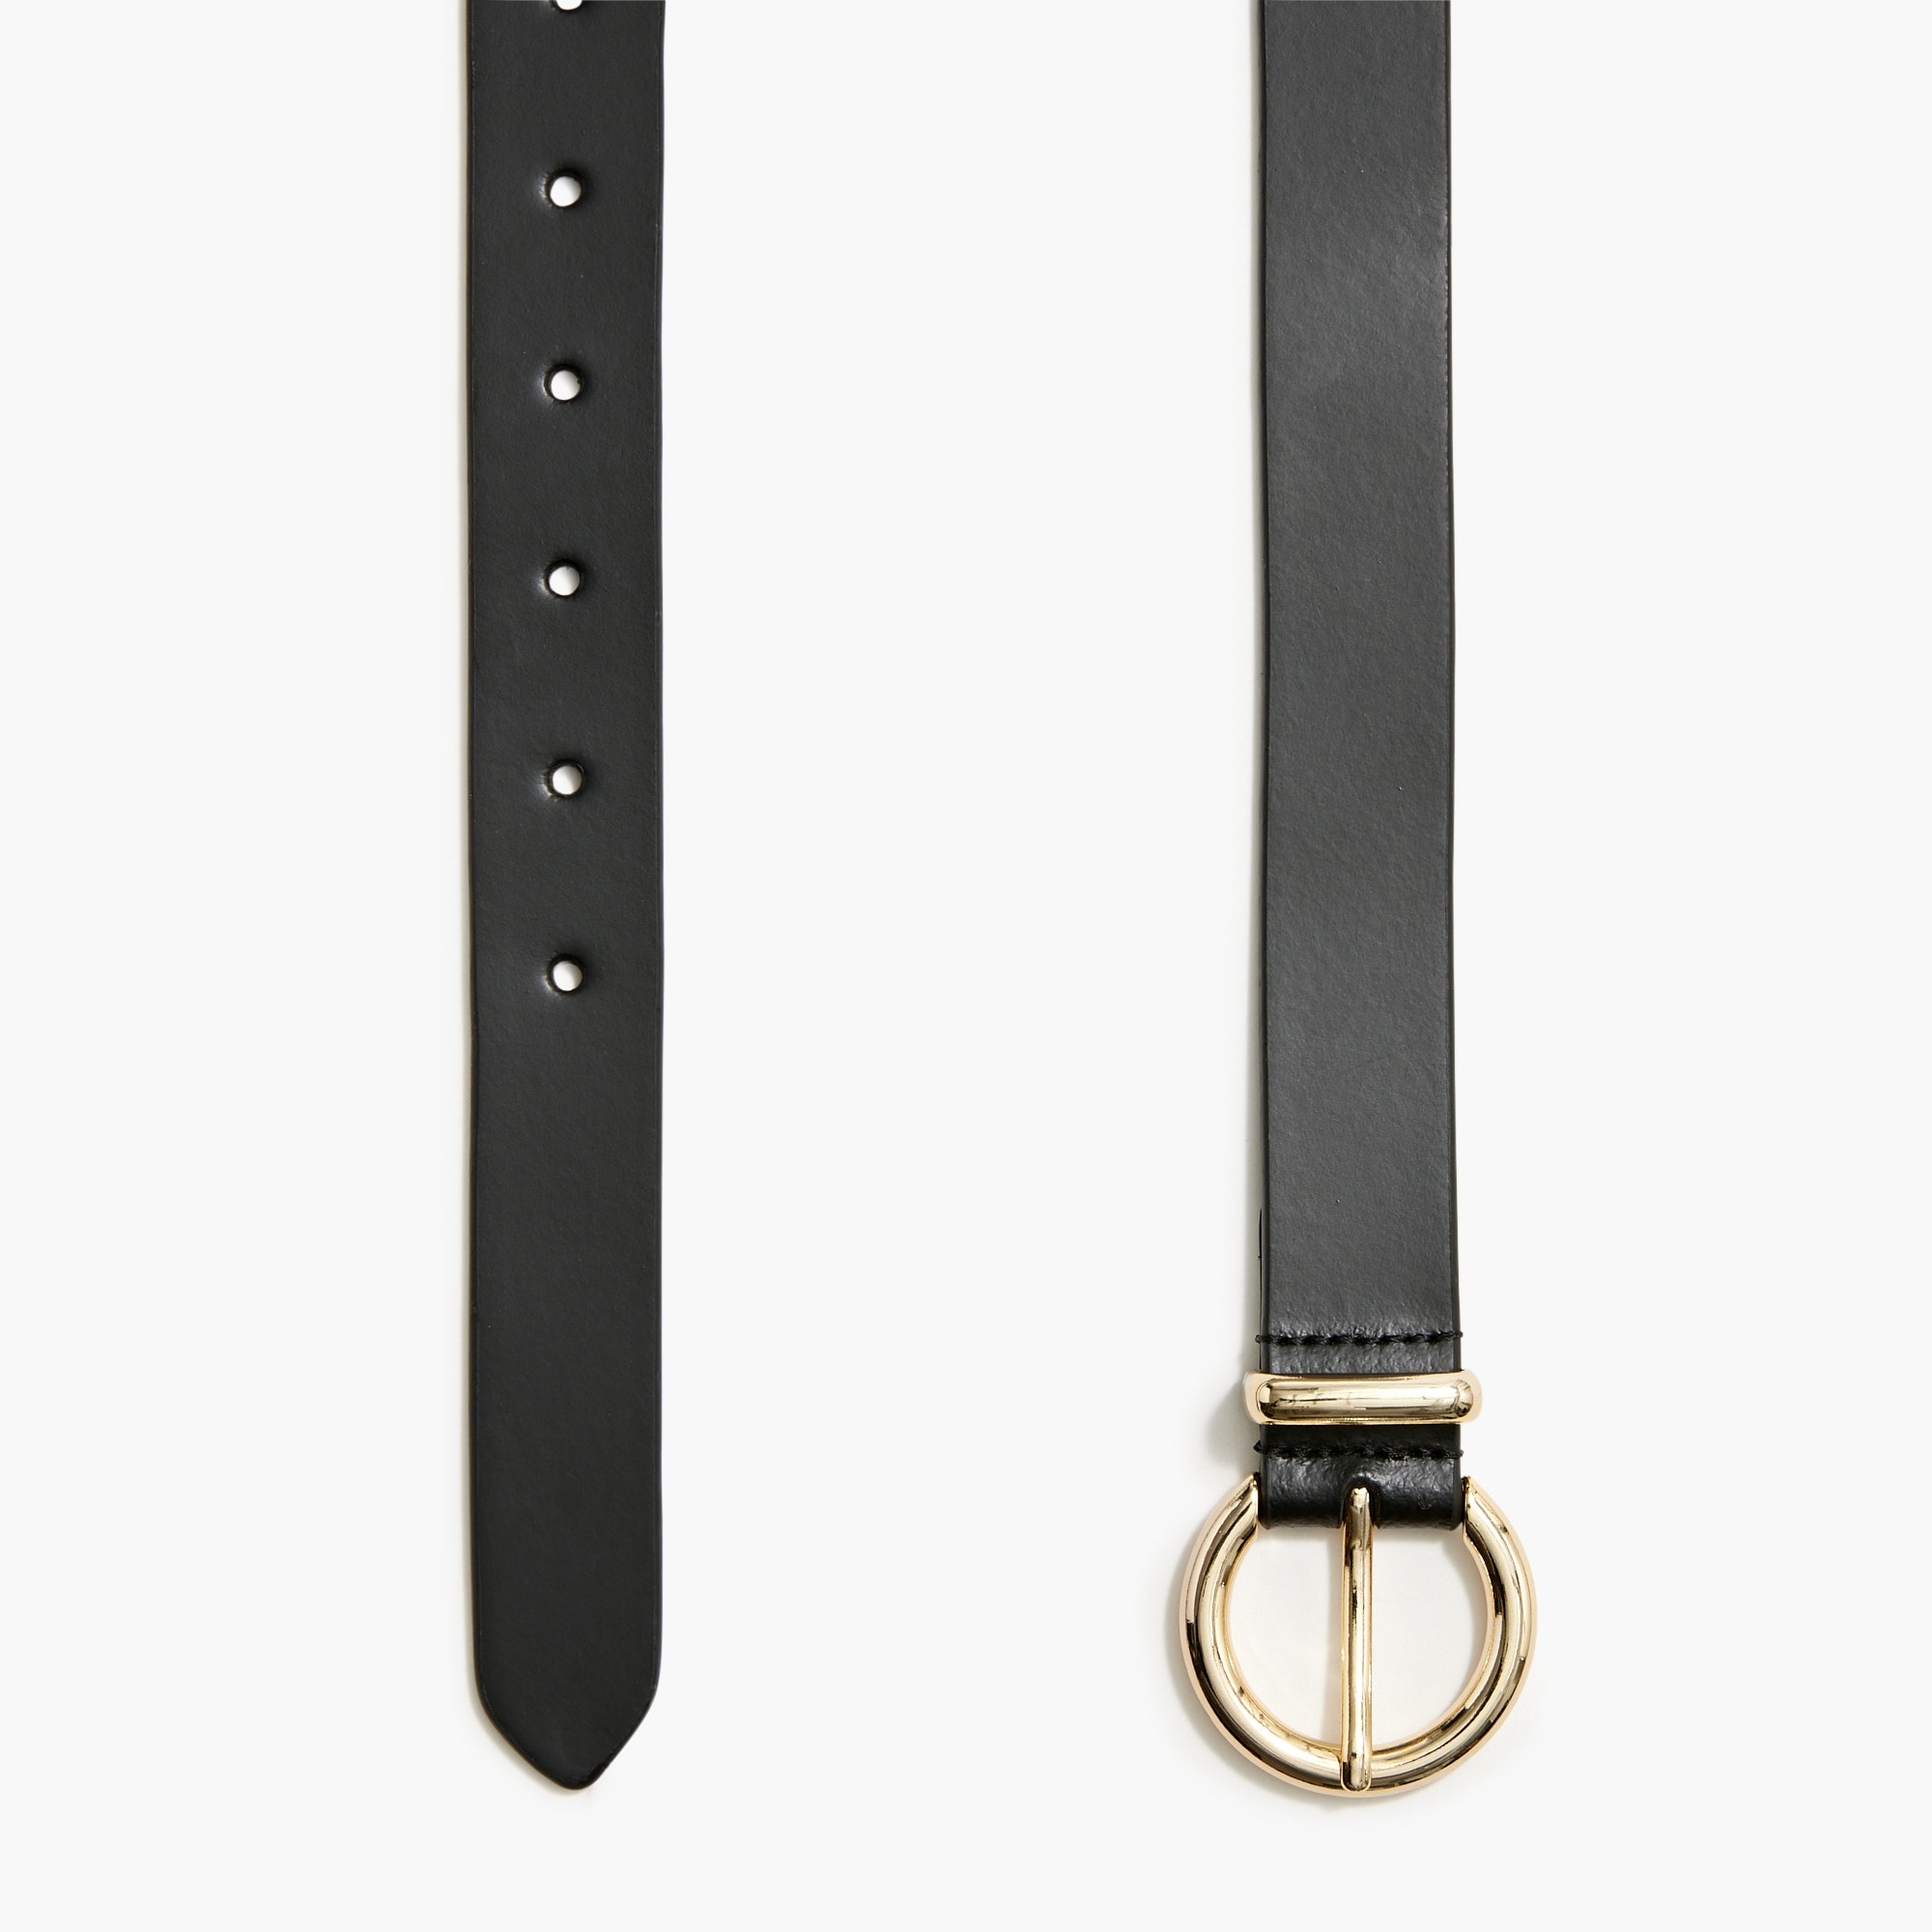 Leather belt with gold-tone buckle